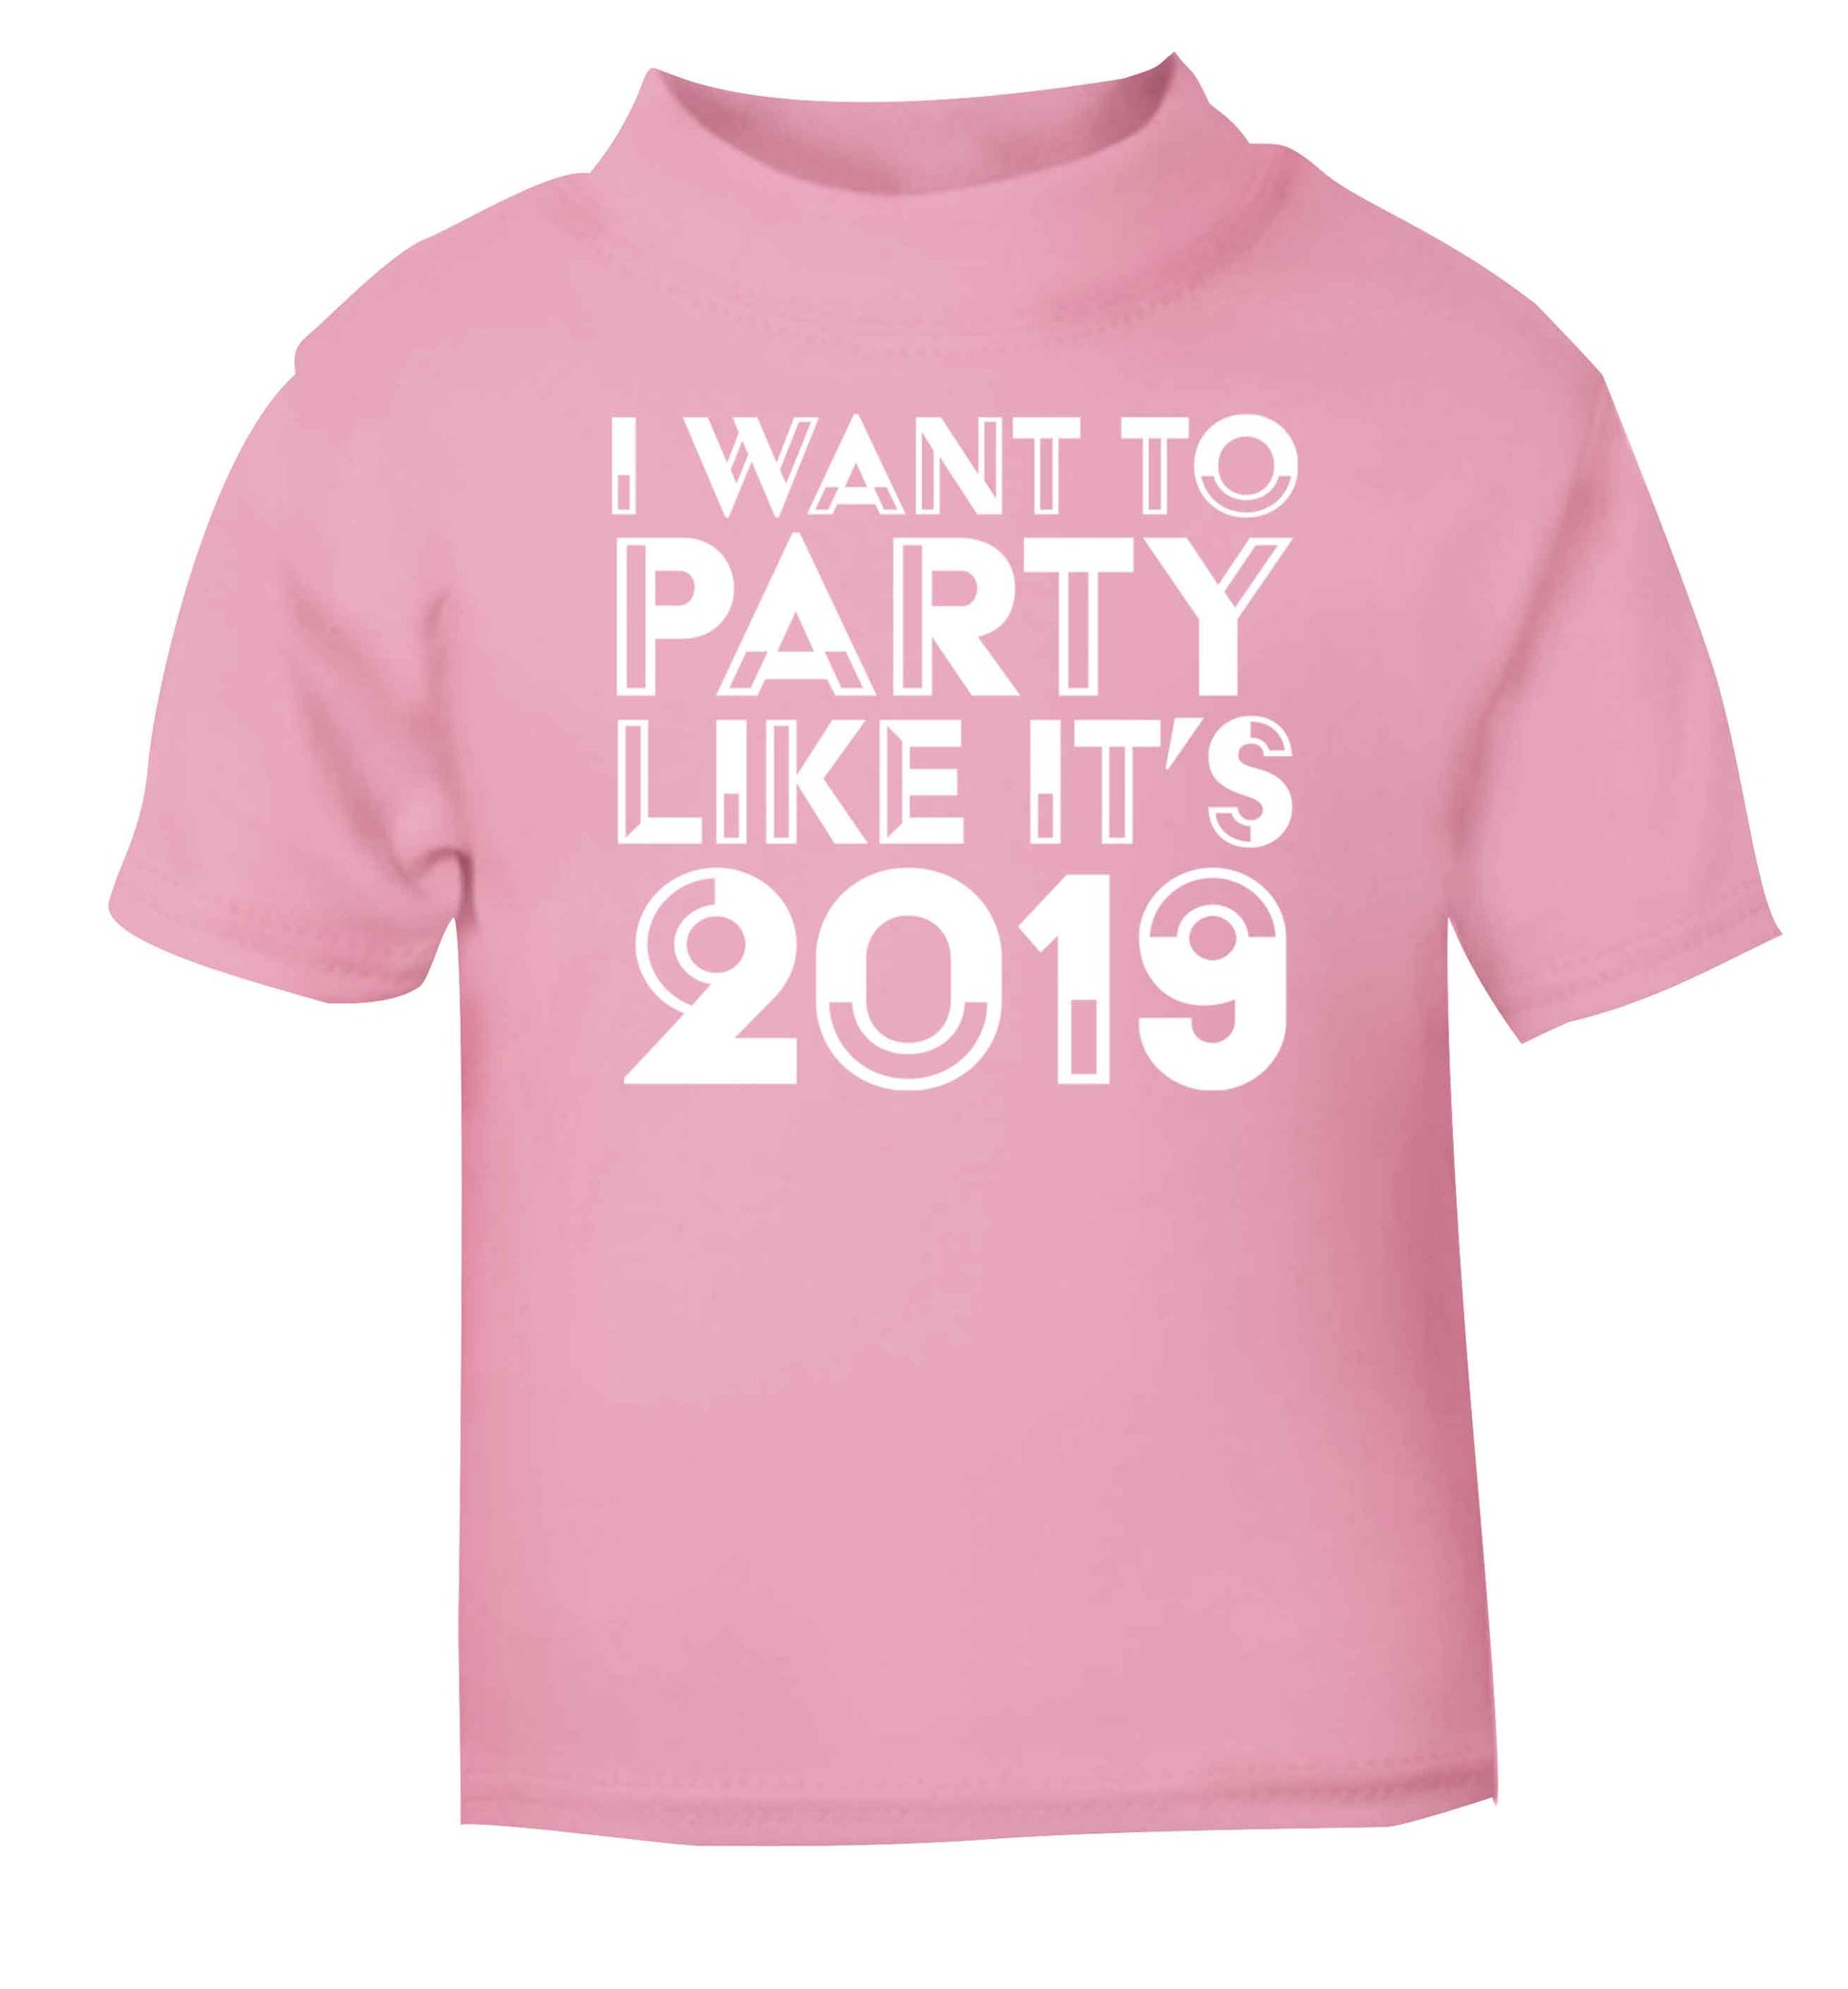 I want to party like it's 2019 light pink baby toddler Tshirt 2 Years